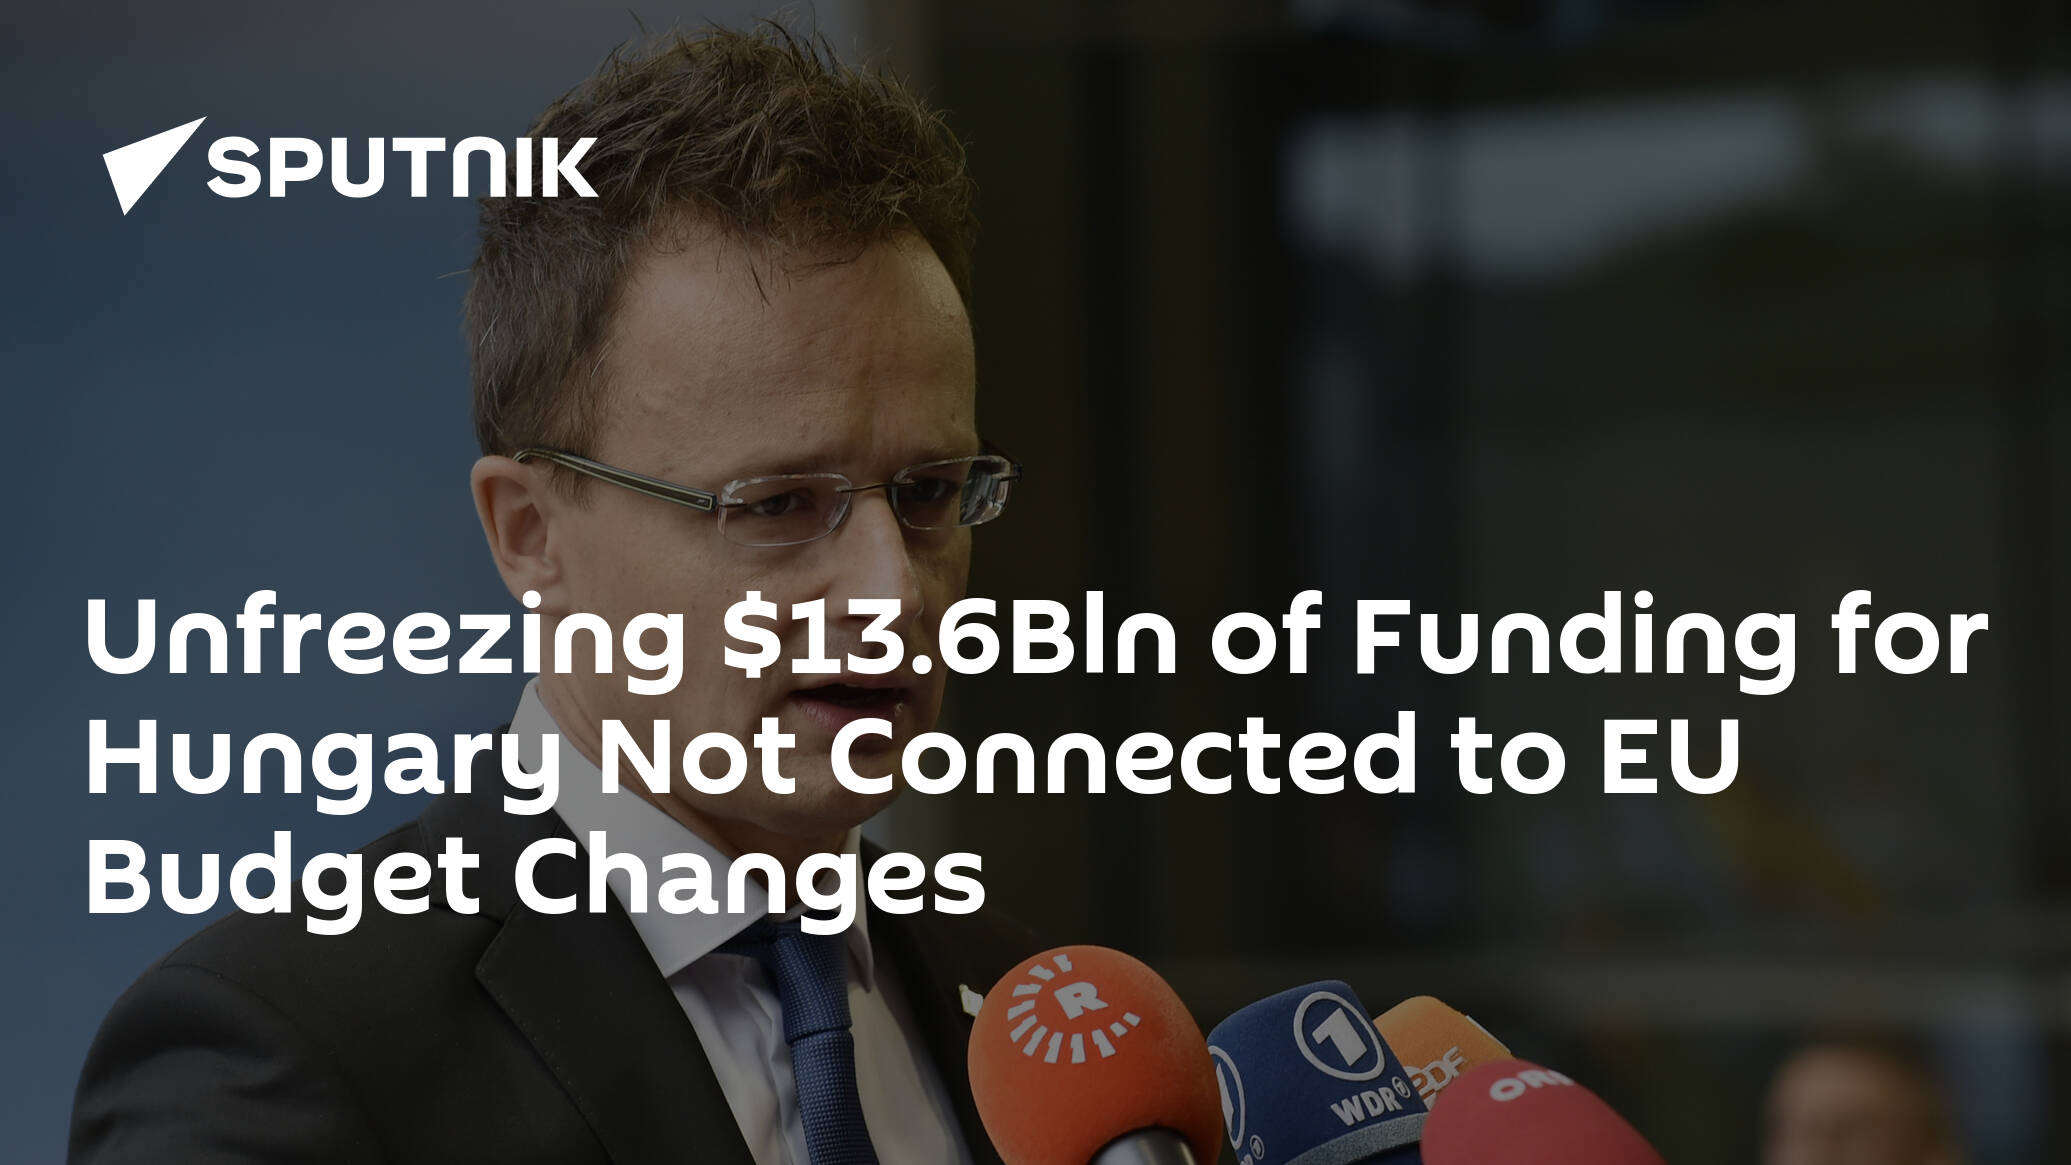 Unfreezing .6Bln of Funding for Hungary Not Connected to EU Budget Changes